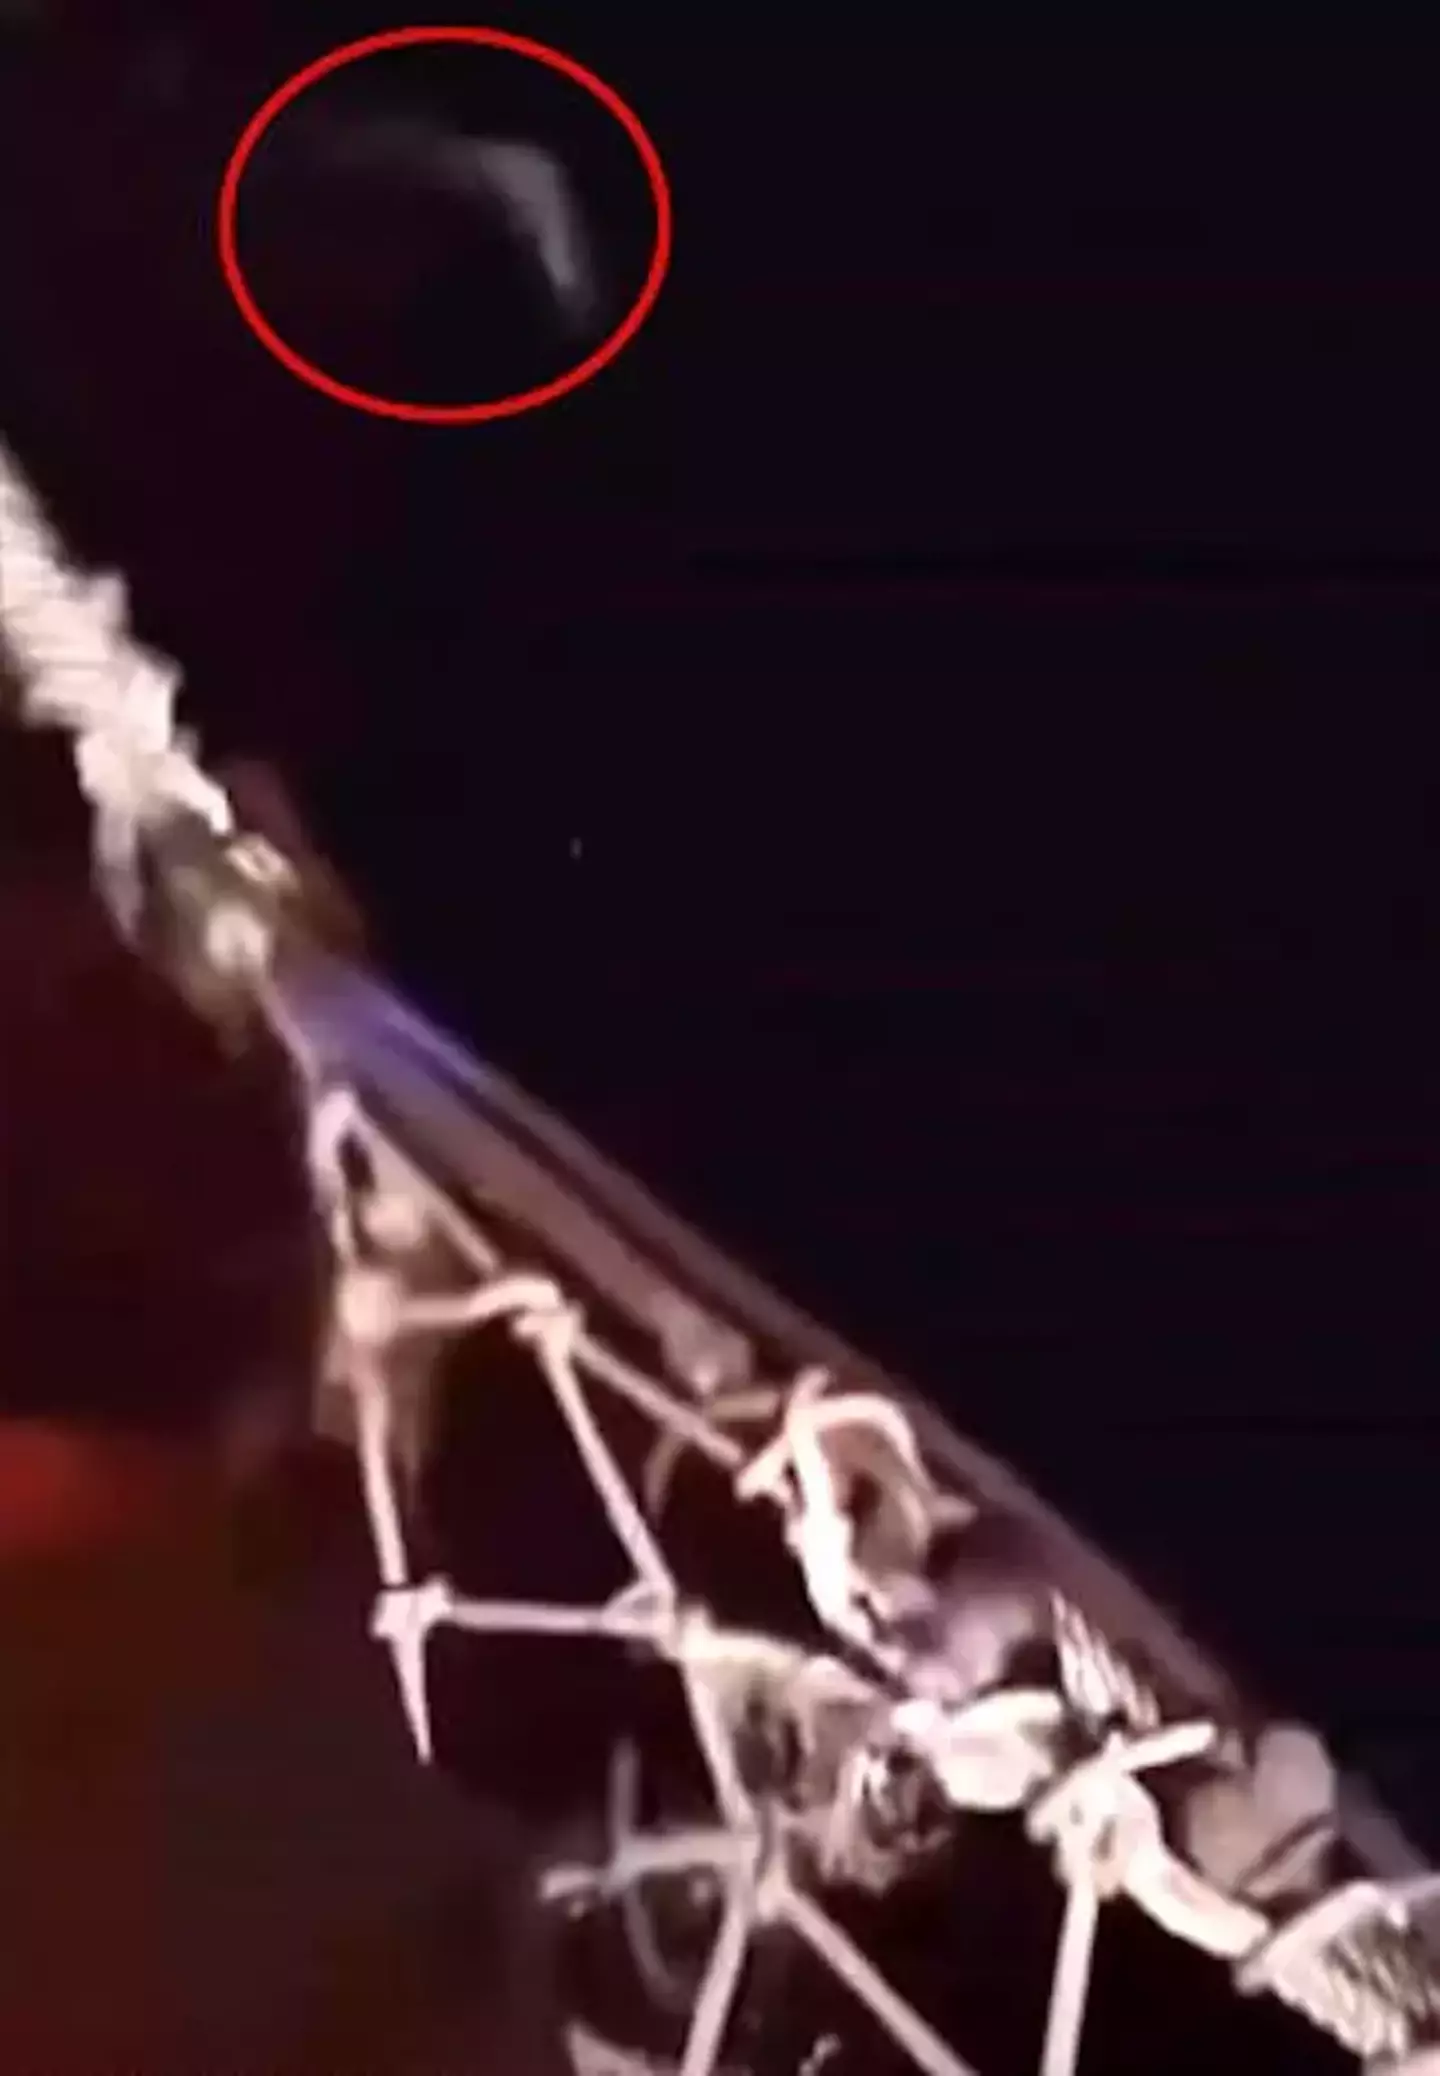 Viewers think the circled image was potentially a shark.